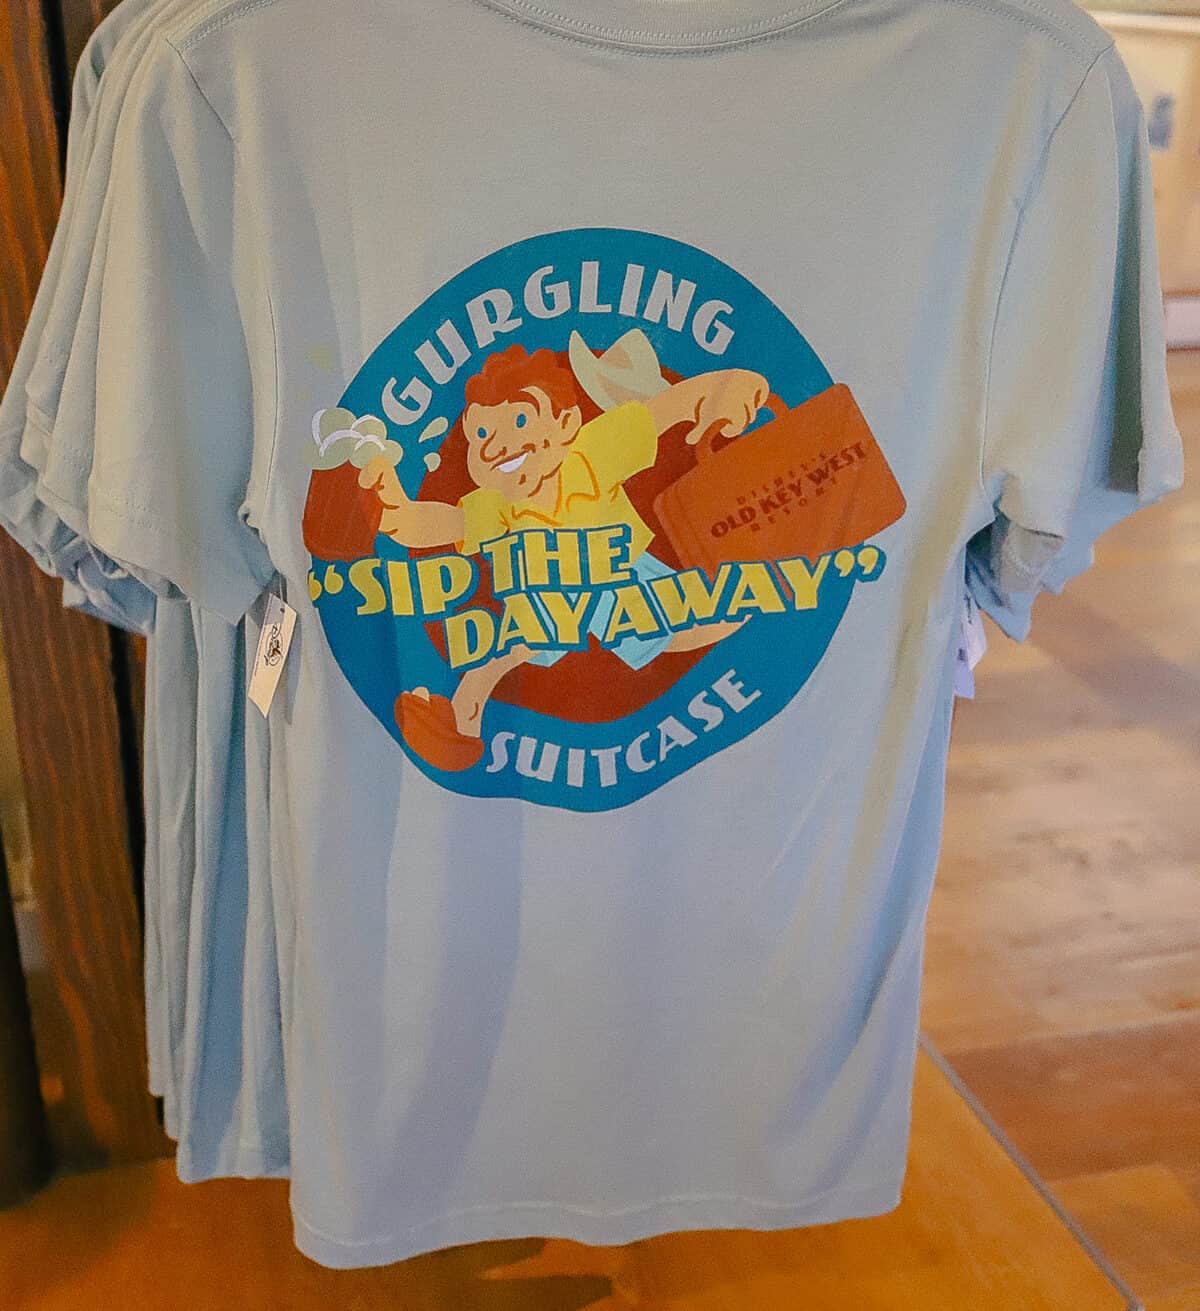 Gurgling Suitcase t-shirt 